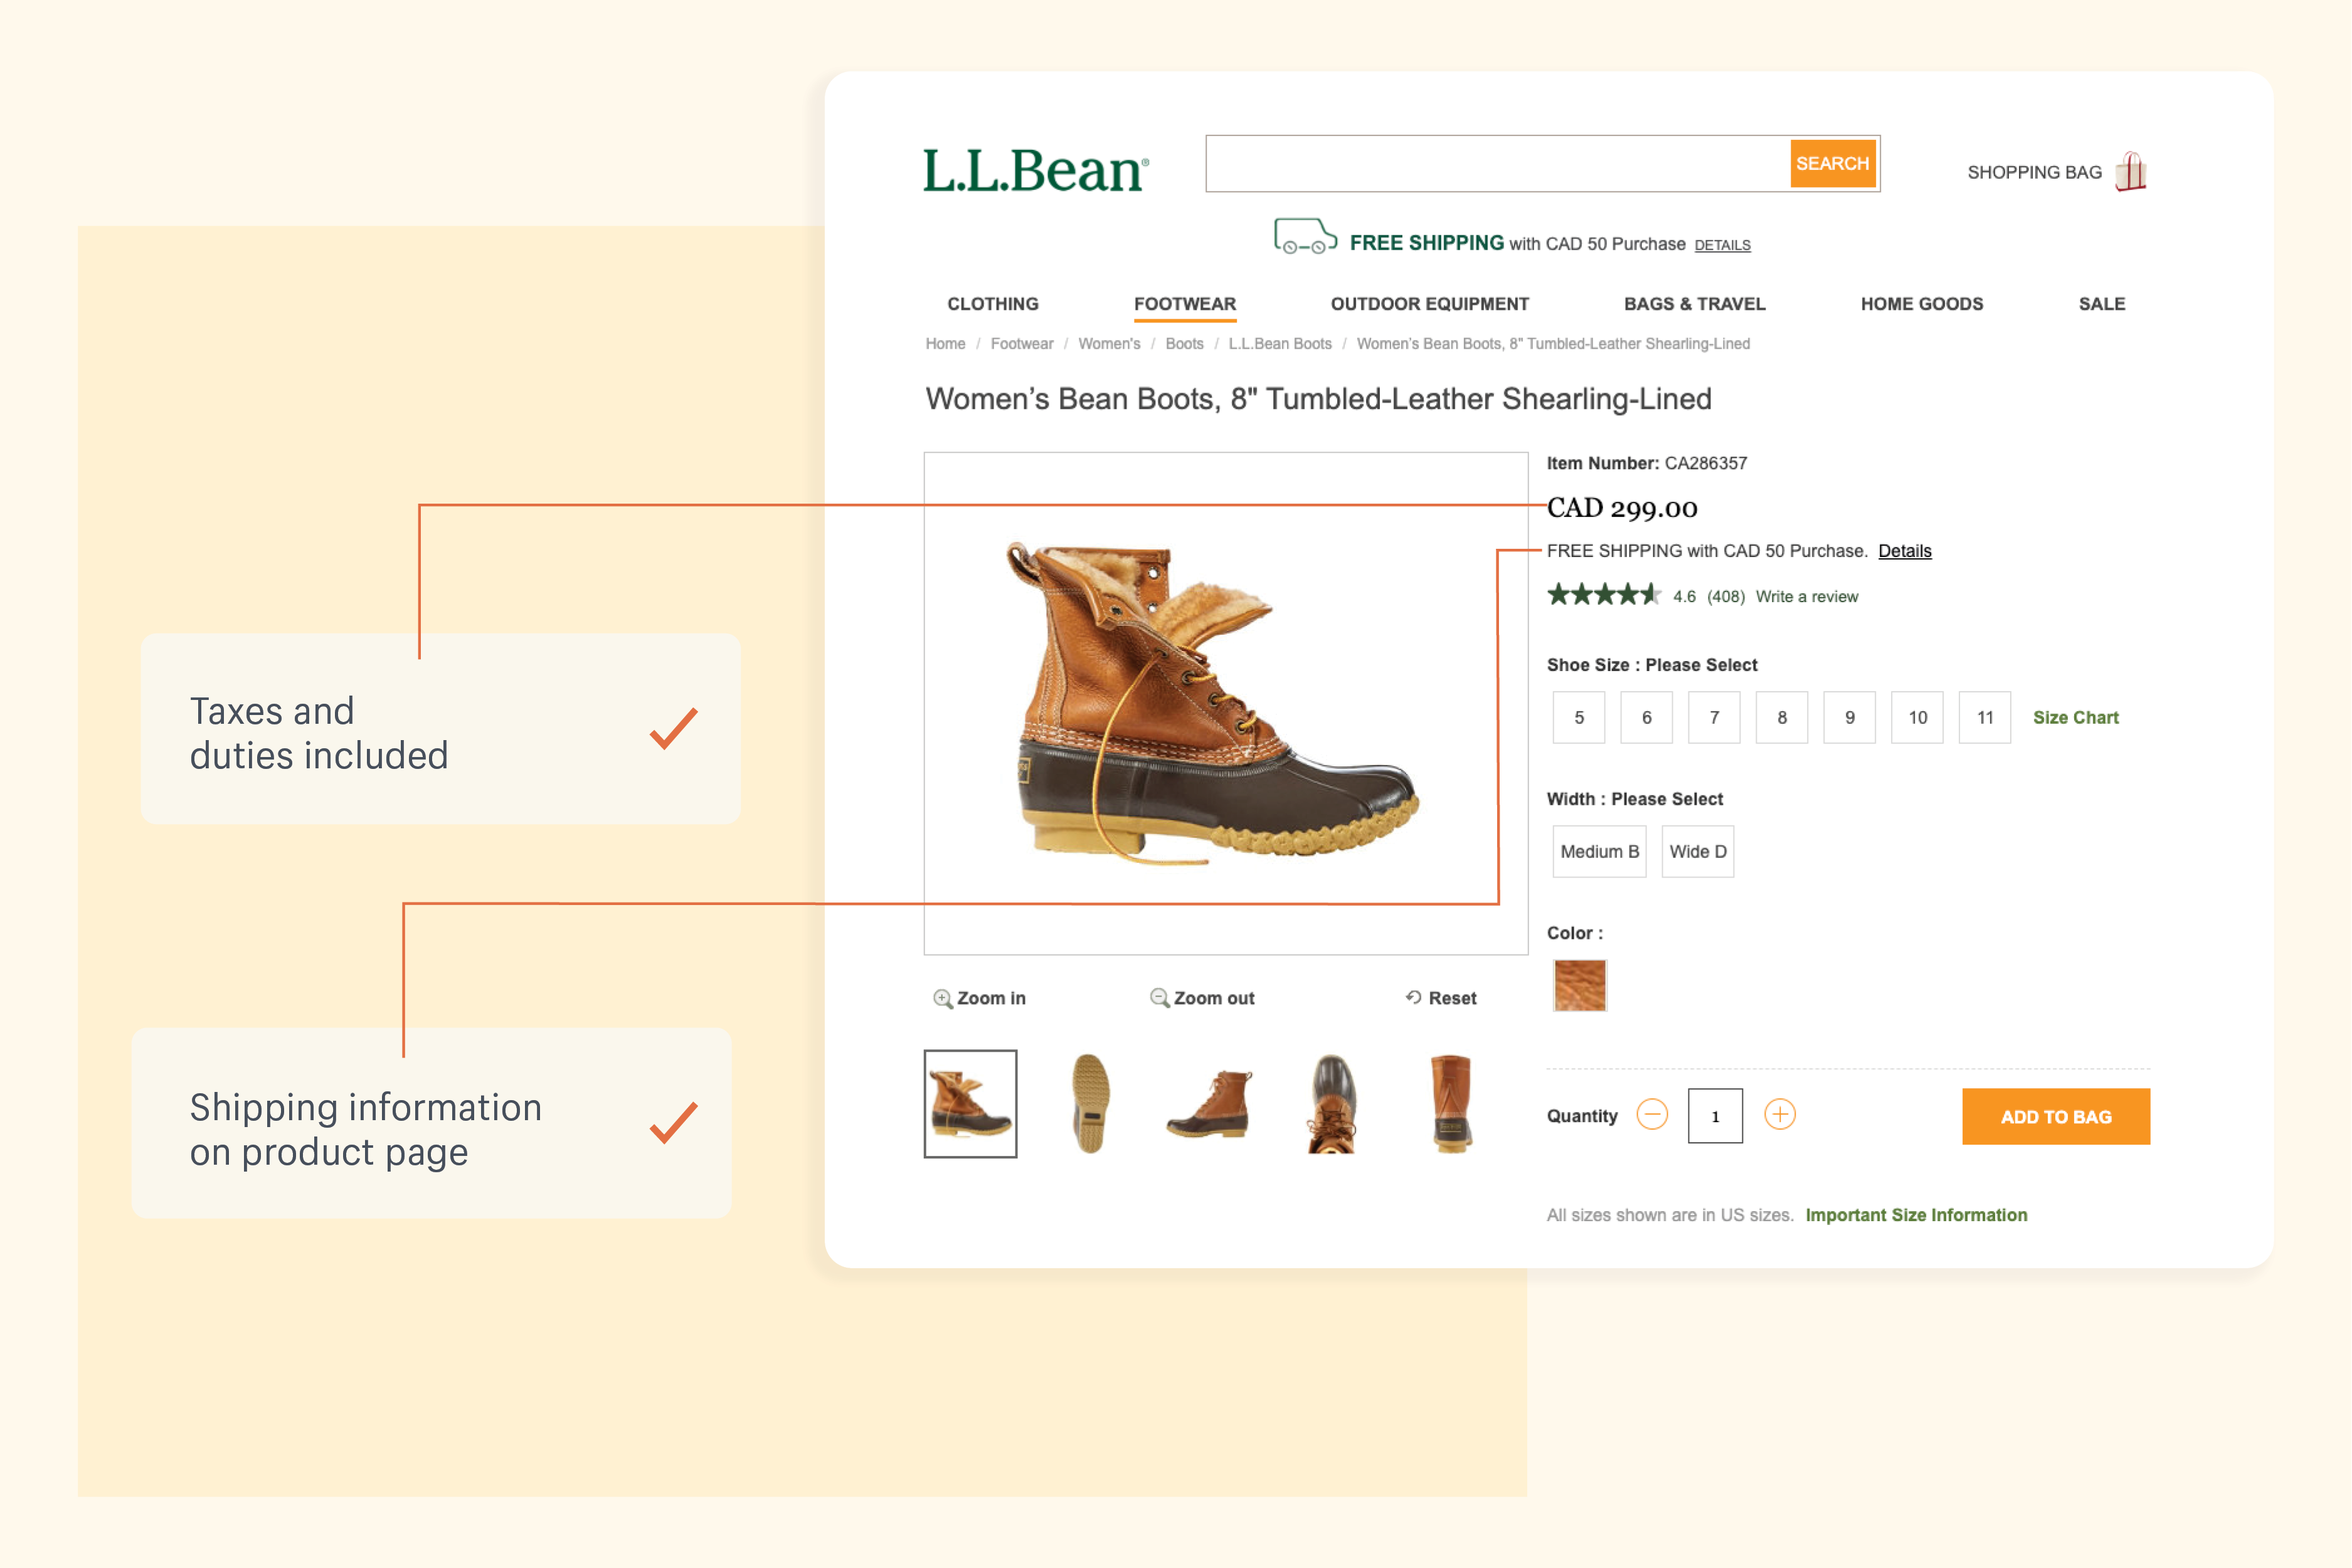 An example of L.L. Bean's builds customer trust through transparency in transactions